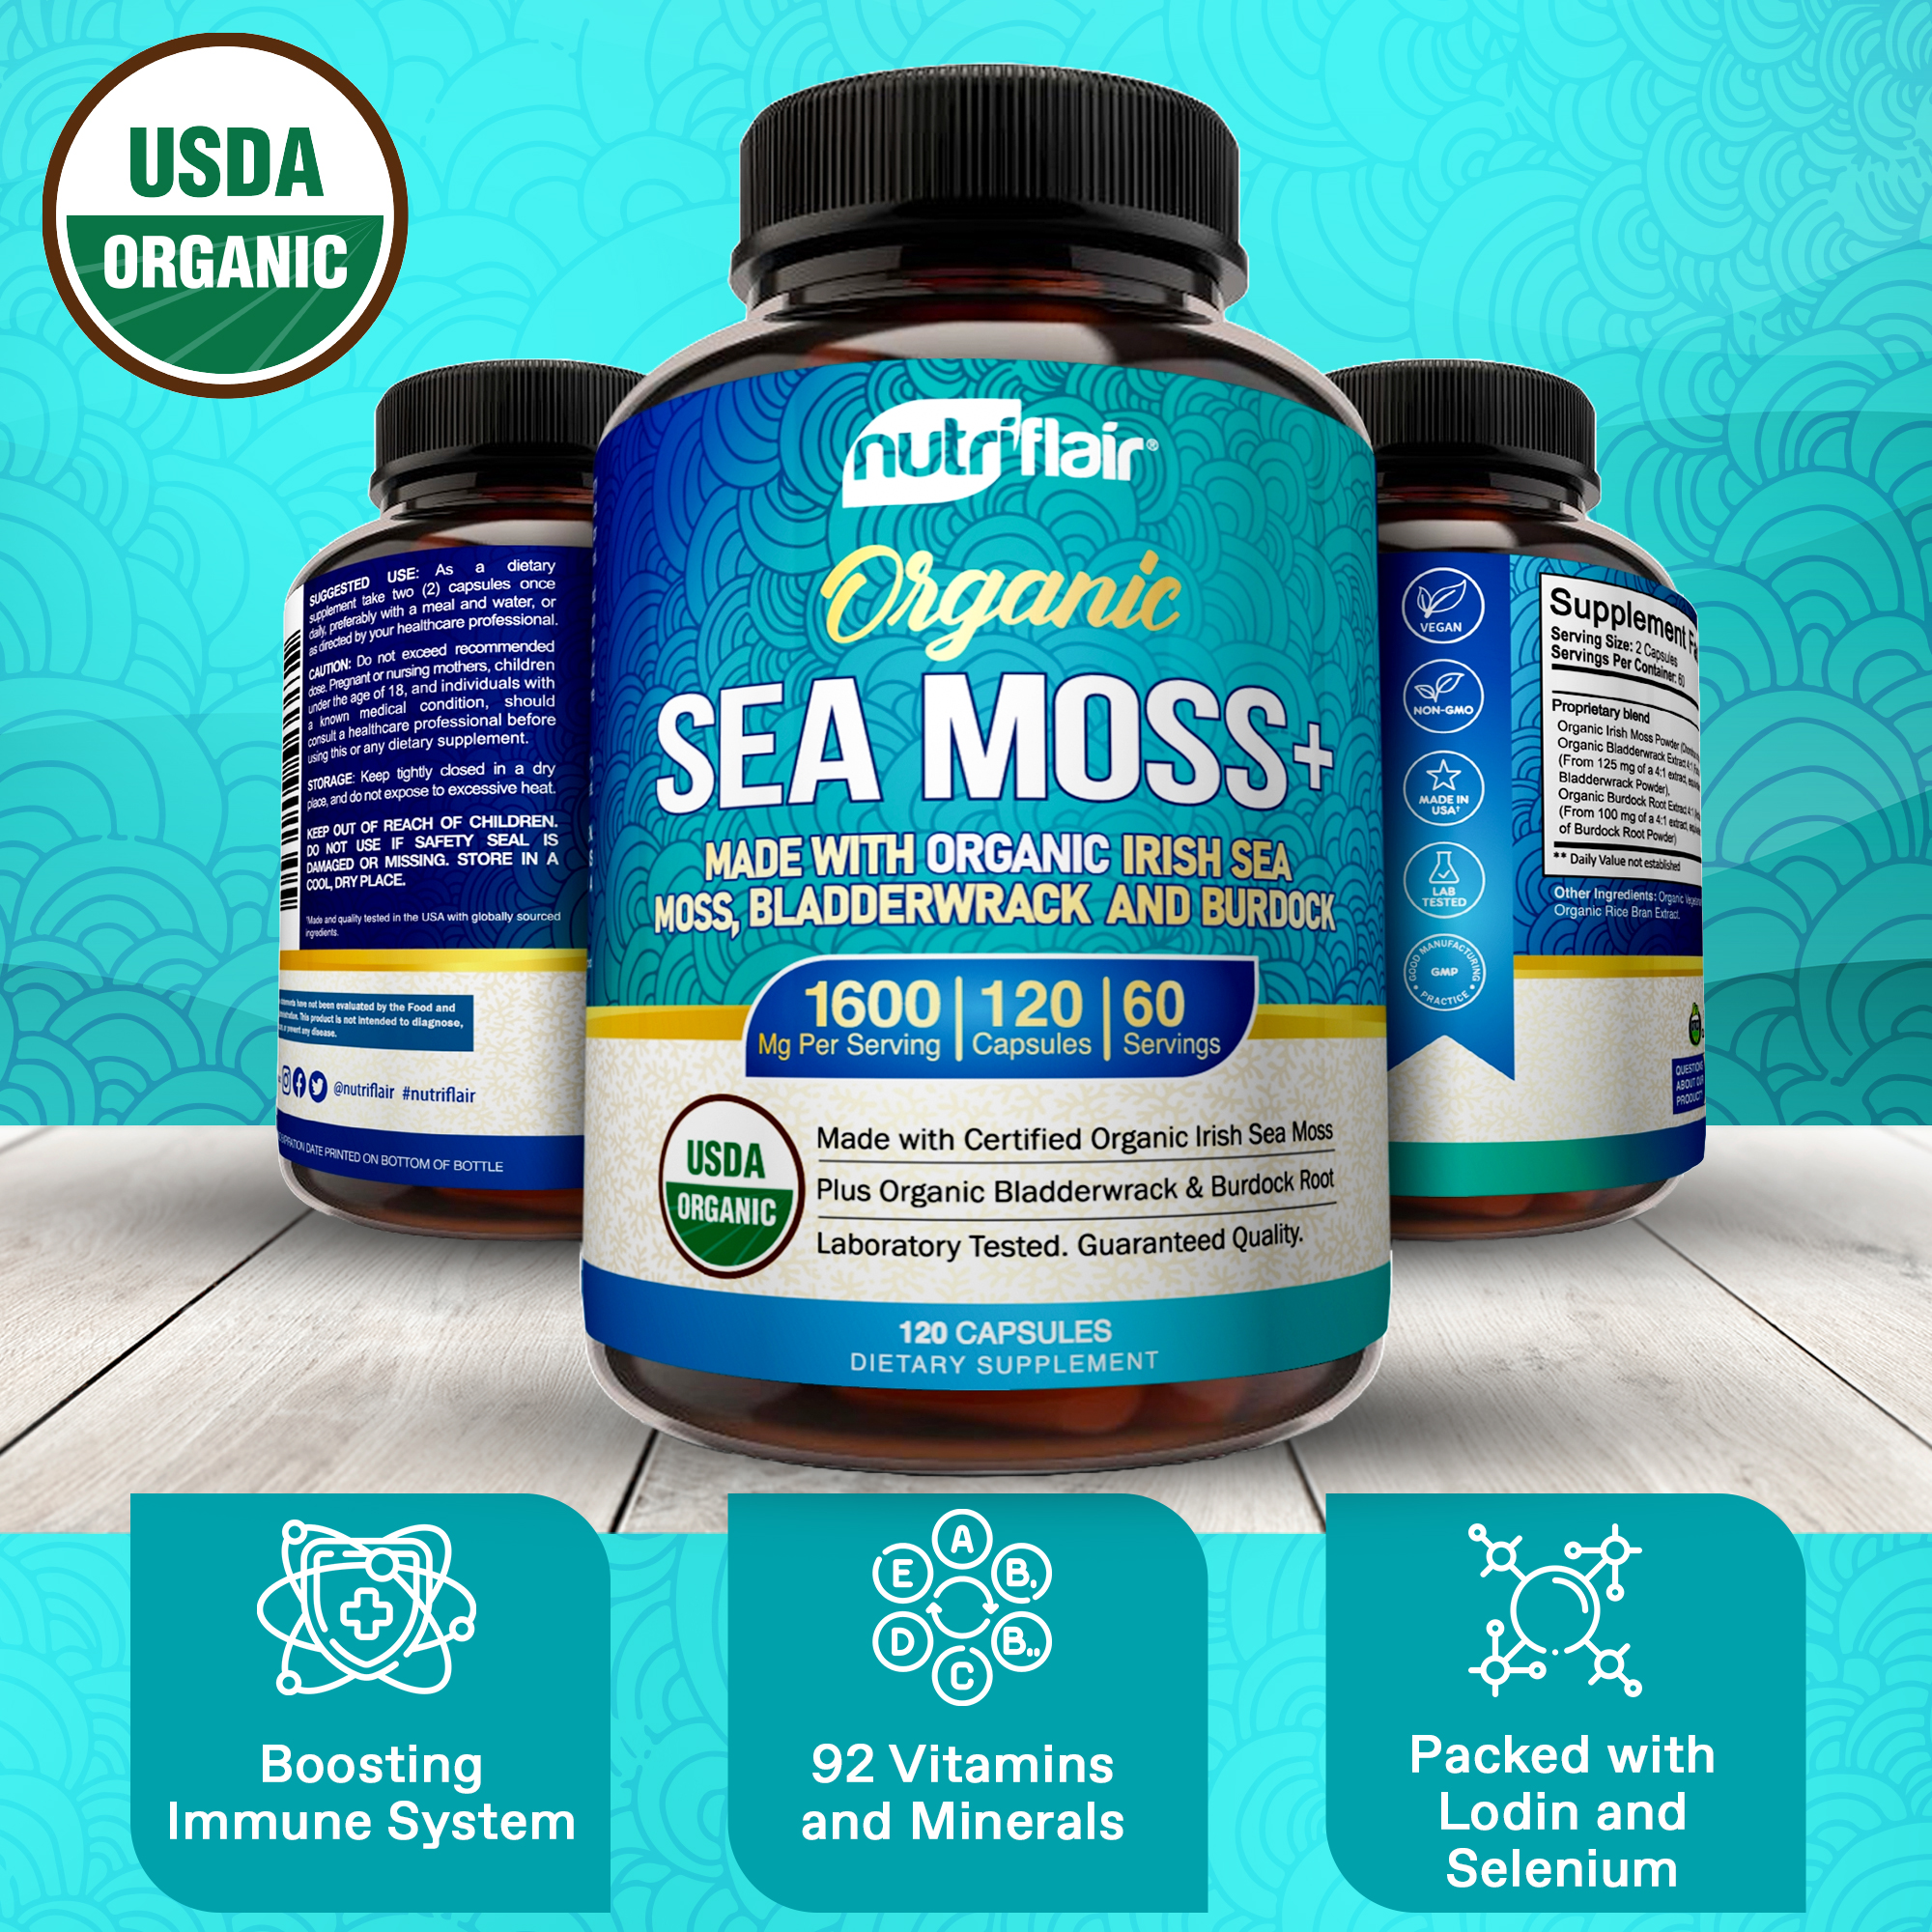 NutriFlair USDA Certified Organic Sea Moss Capsules 1600mg, 120 Capsules - Immunity, Gut, Energy - Superfood Sea Moss Supplements with Raw Sea Moss Powder for Women and Men - image 2 of 8